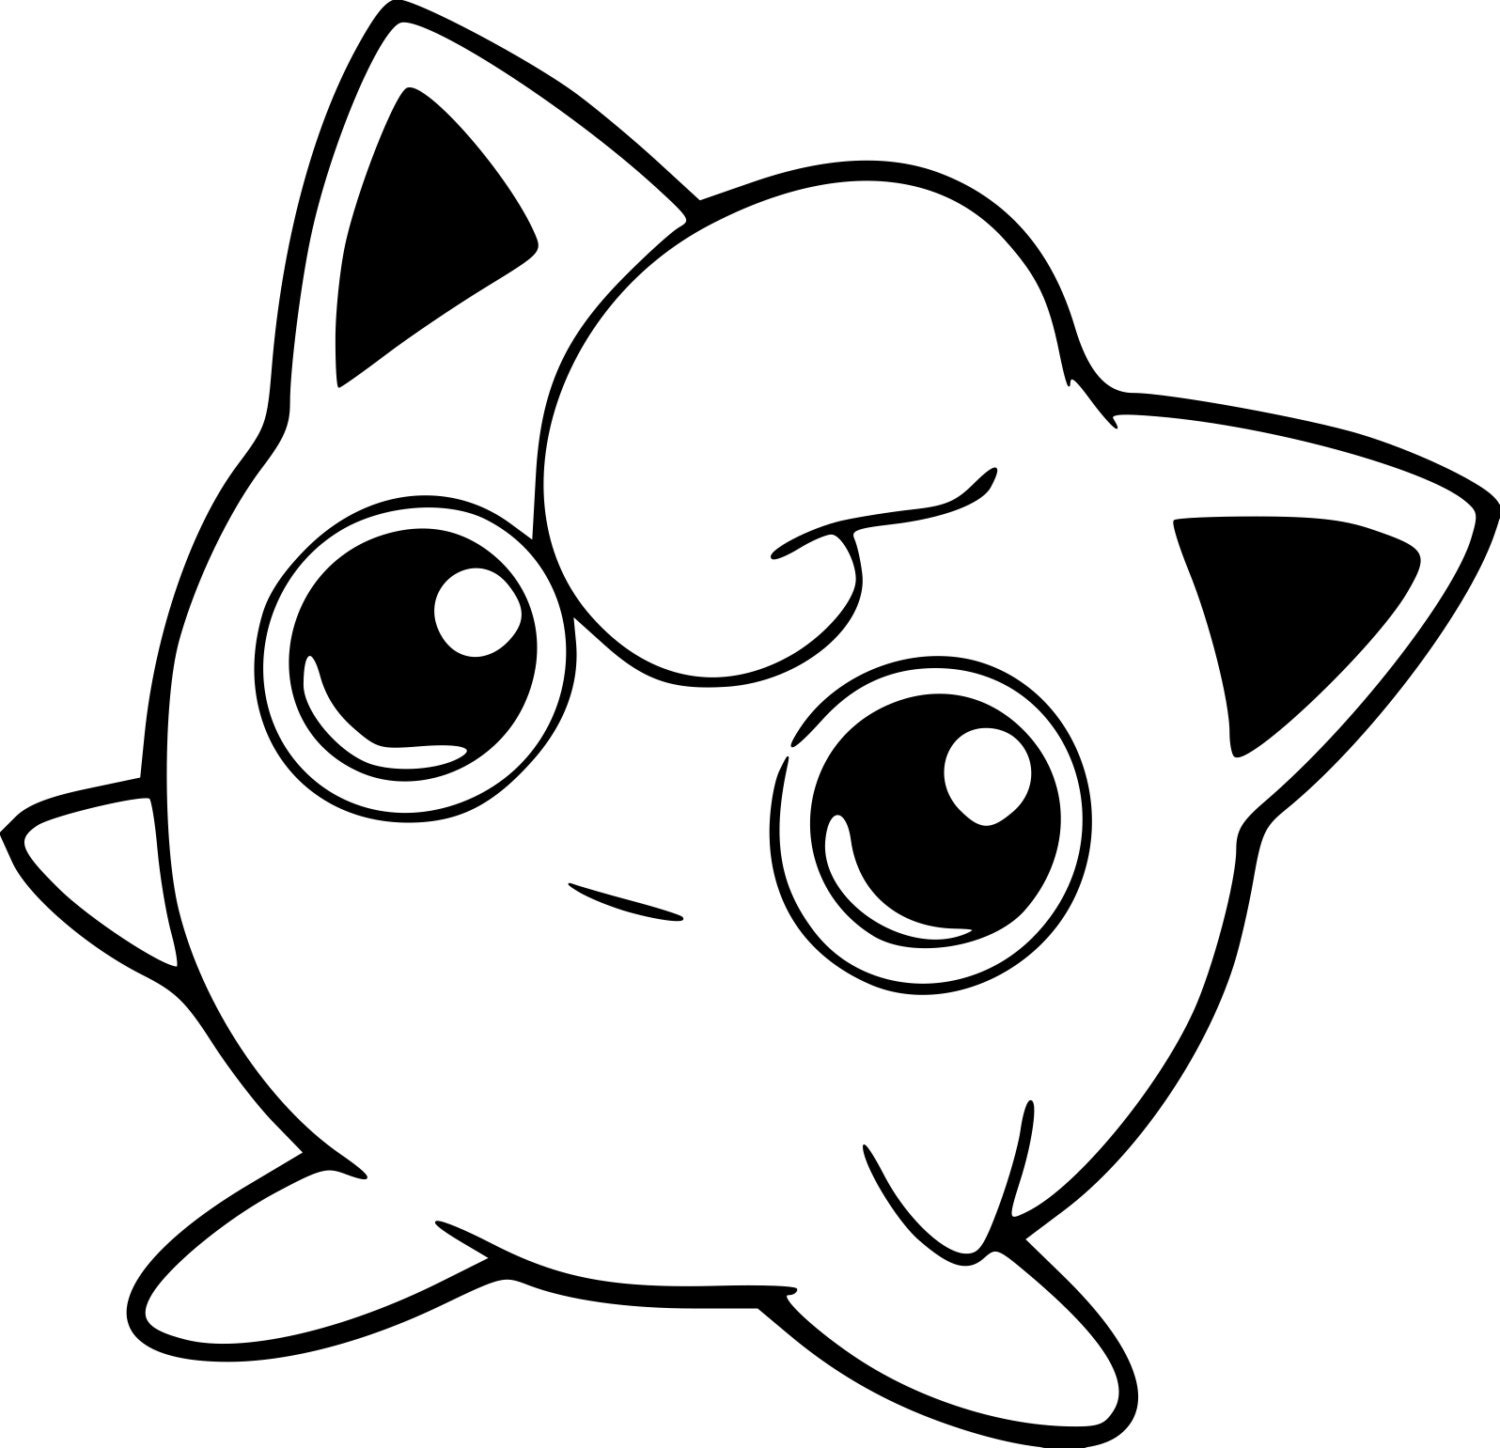 pokemon jigglypuff coloring page Pokemon jigglypuff coloring pages at ...